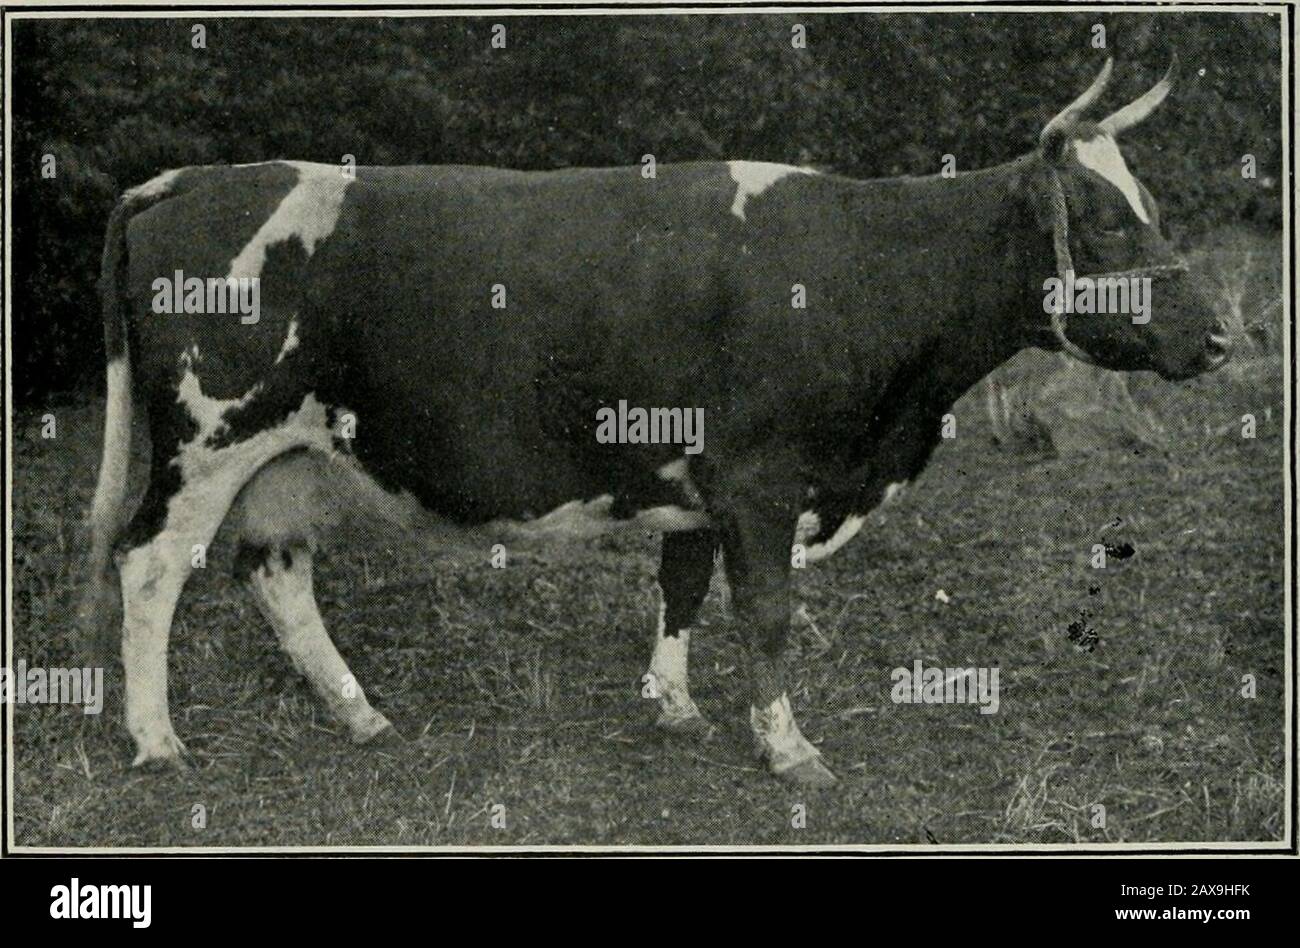 The Journal of the Department of Agriculture, Victoria . itilined.) A PROFITABLE DAIRY COW.. The illustration herewith is a typical dairy cow of pure Ayrshire breed-ing, the property of Mr. T. Cook. Carpentaria, Glenroy. For theseason just ending, covering a period of seven rnonths, she has produced5,530 lbs. of milk. This cow% Edith .2nd. was purchased from the breeder, Mr. J.Thomp.son, Hazelmount, Krowera, near Loch, Gippsland. by Mr.Cooks father at the RoNal Show sales, September, 1905, for the purposecf supplying milk and butter to the household. Mr. Cook has weighed and recorded this cows Stock Photo